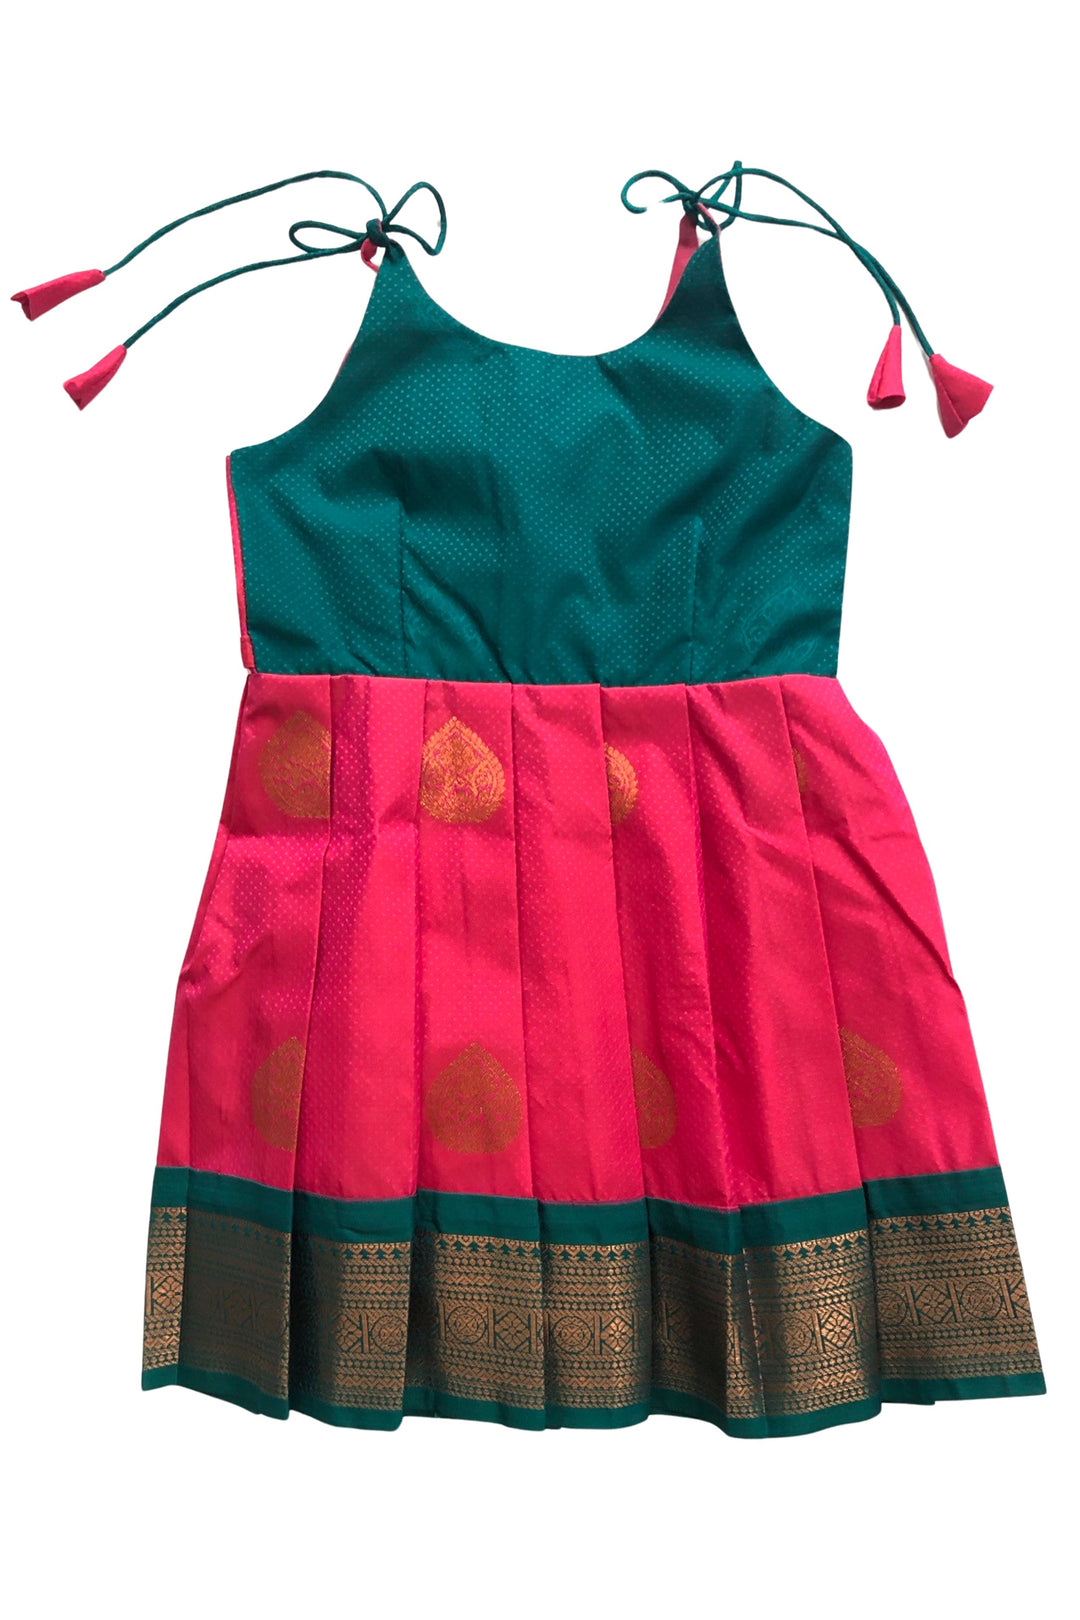 The Nesavu Tie Up Frock Traditional Teal and Pink Silk Tie-Up Frock with Classic Print – Ethnic Elegance Nesavu 18 (2Y) / Pink / Style 5 T315E-18 Teal & Pink Ethnic Silk Frock | Traditional Printed Tie-Up Dress | The Nesavu